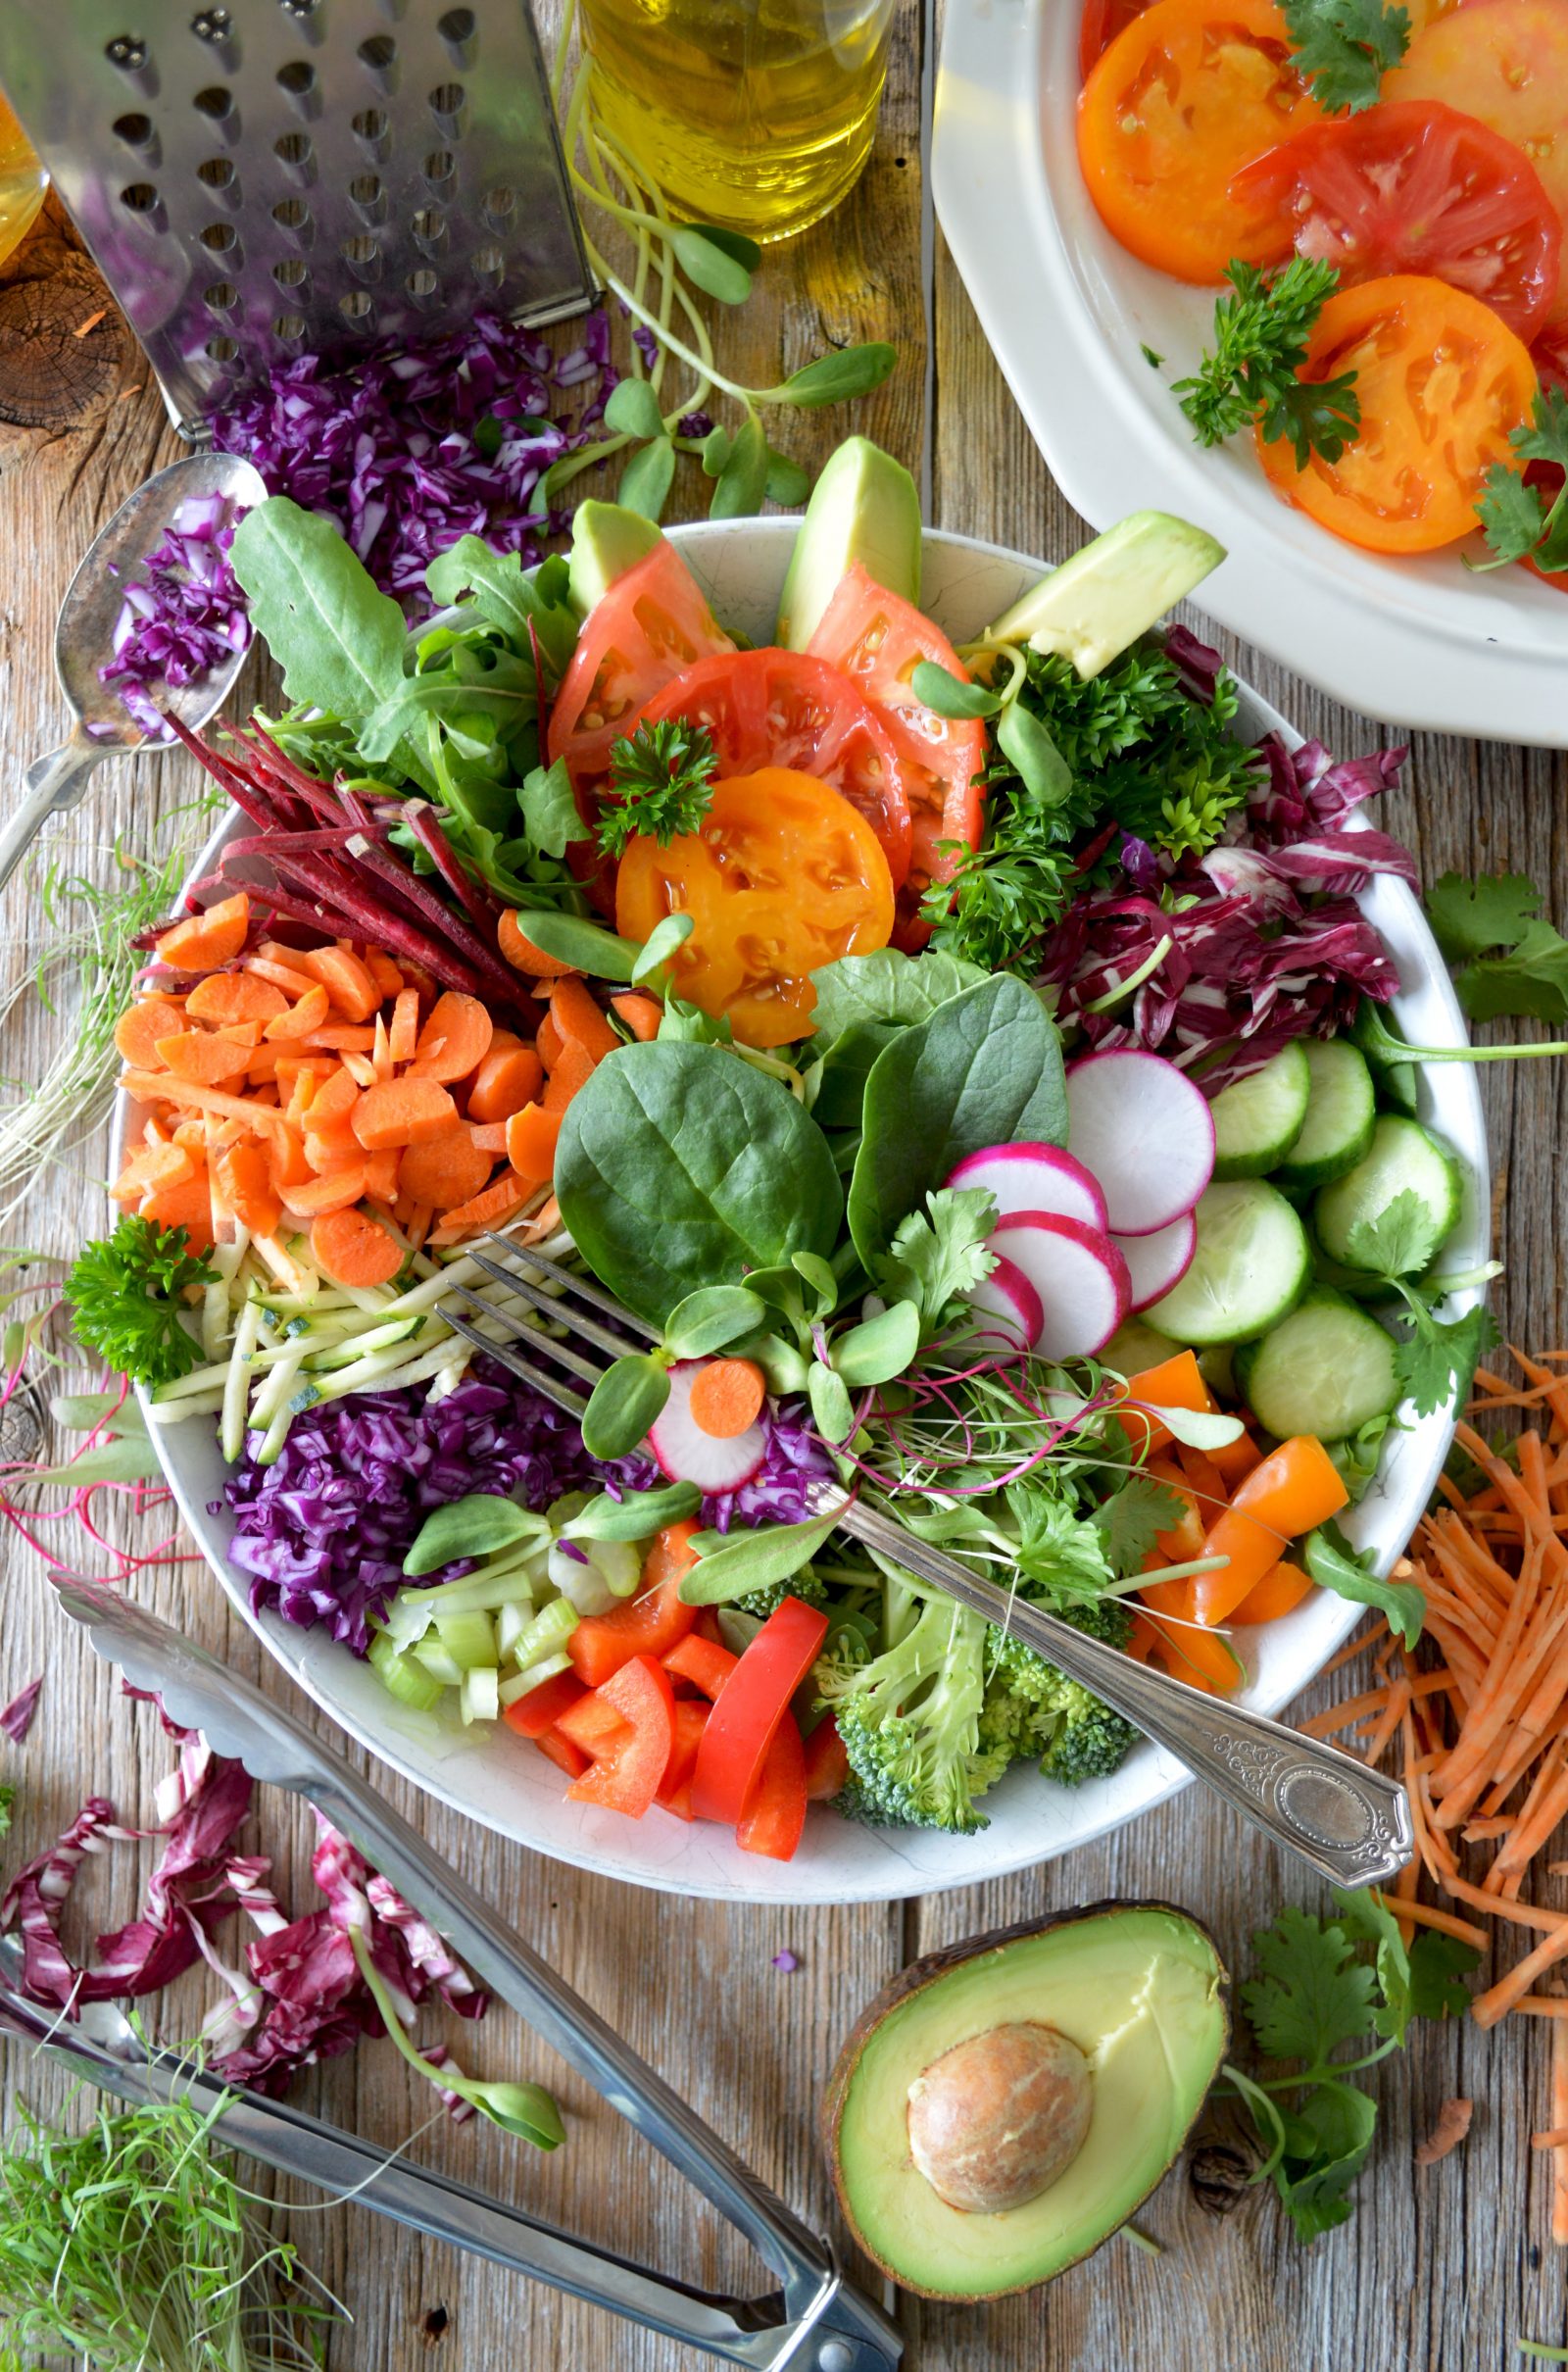 3 Ways to Simplify Plant-Based Eating